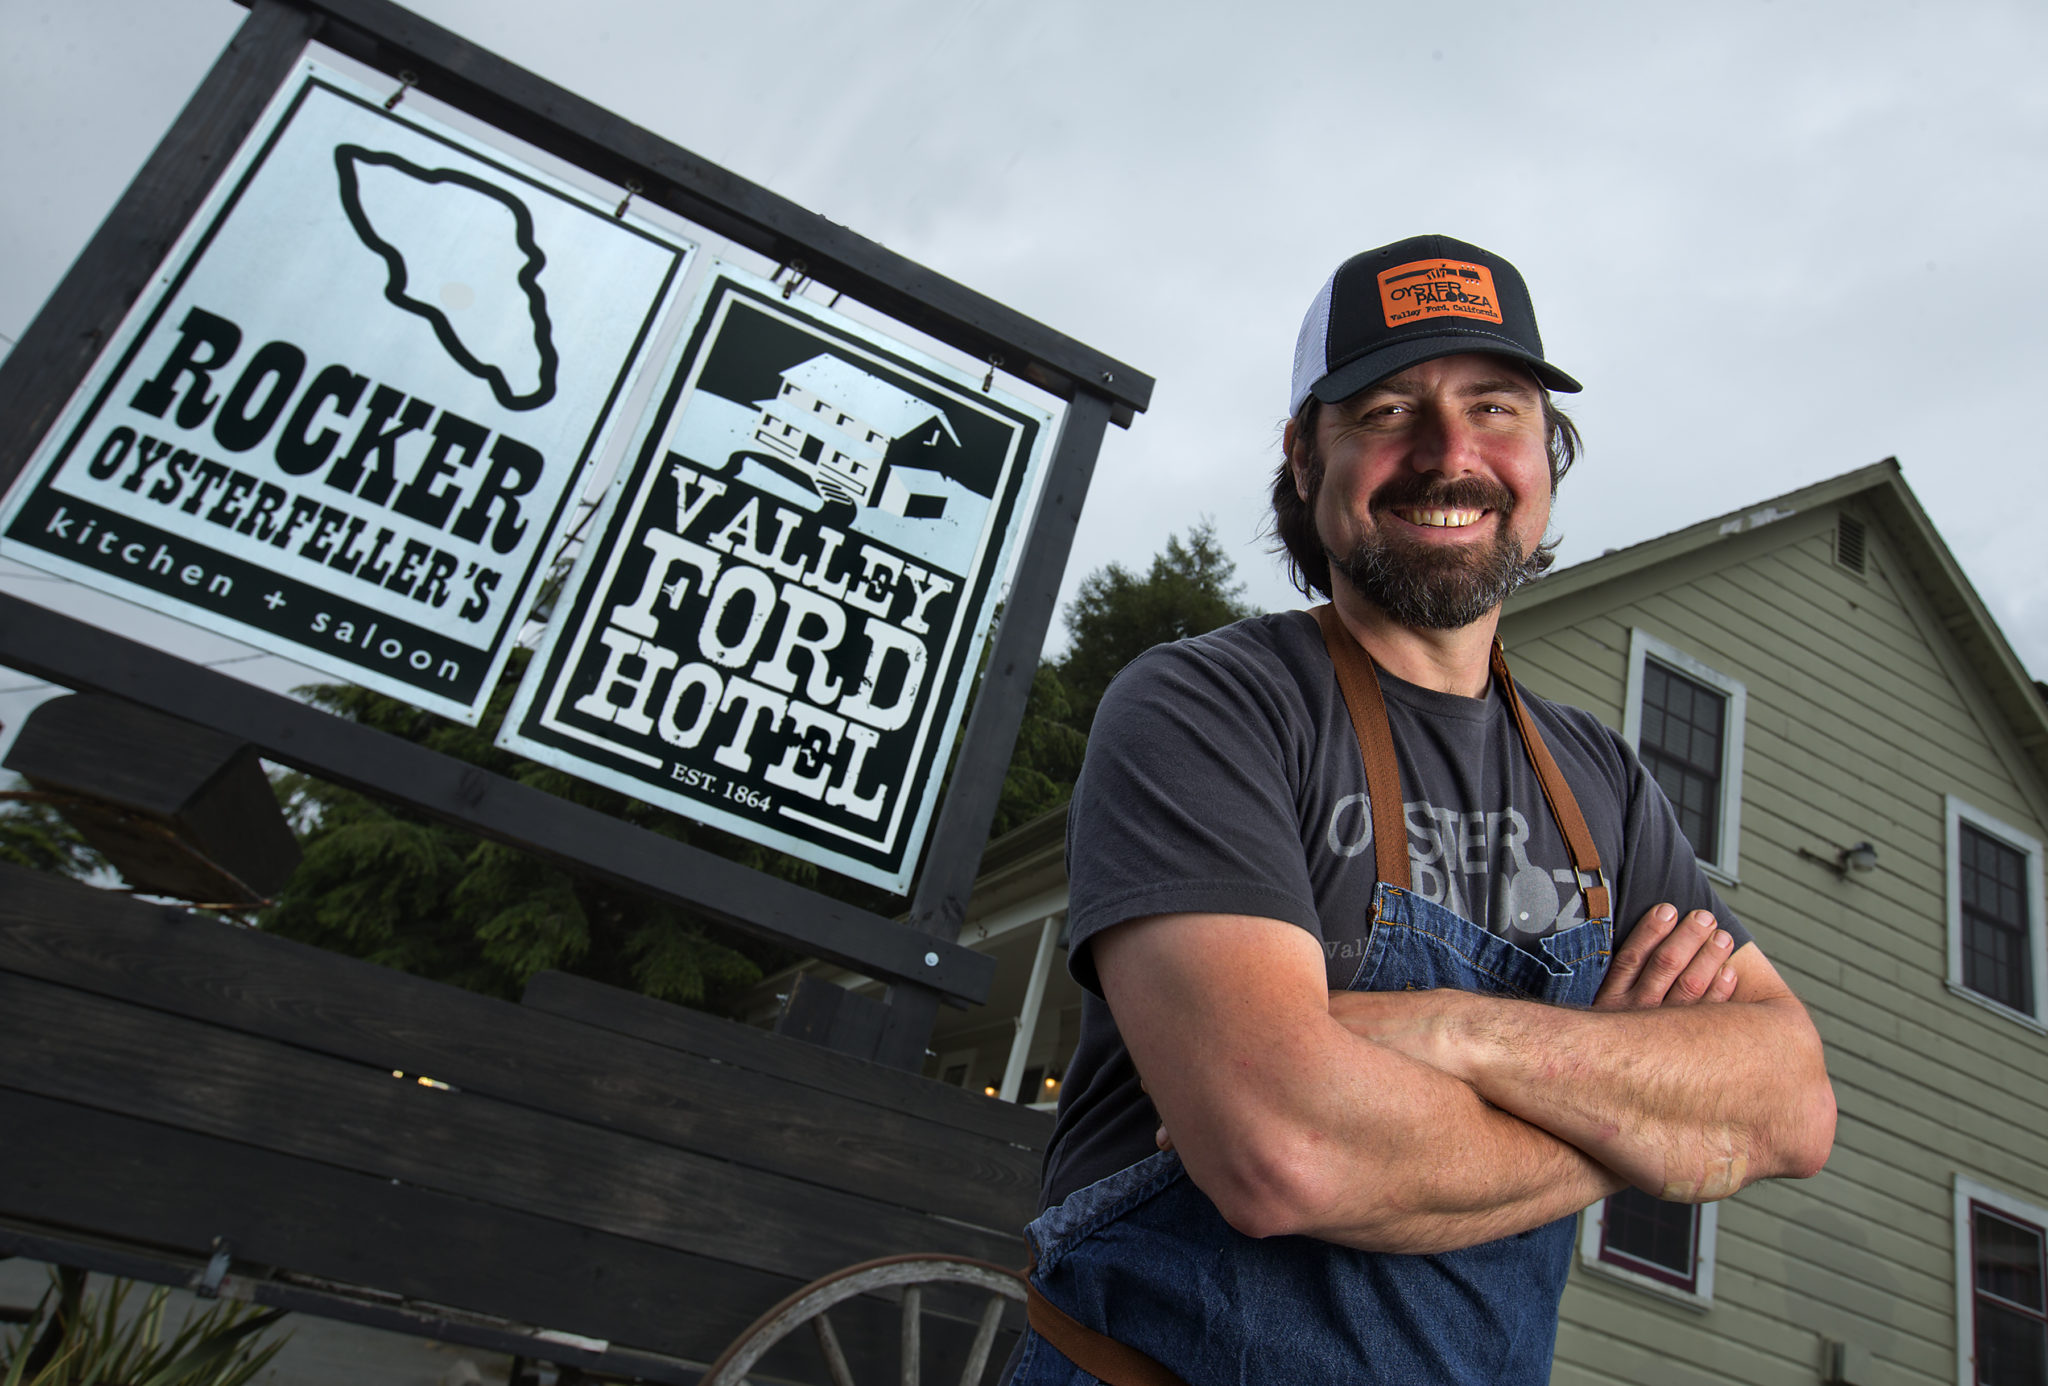 Chef Brandon Guenther from Rocker Oysterfeller's Kitchen + Saloon in Valley Ford. (photo by John Burgess/The Press Democrat)